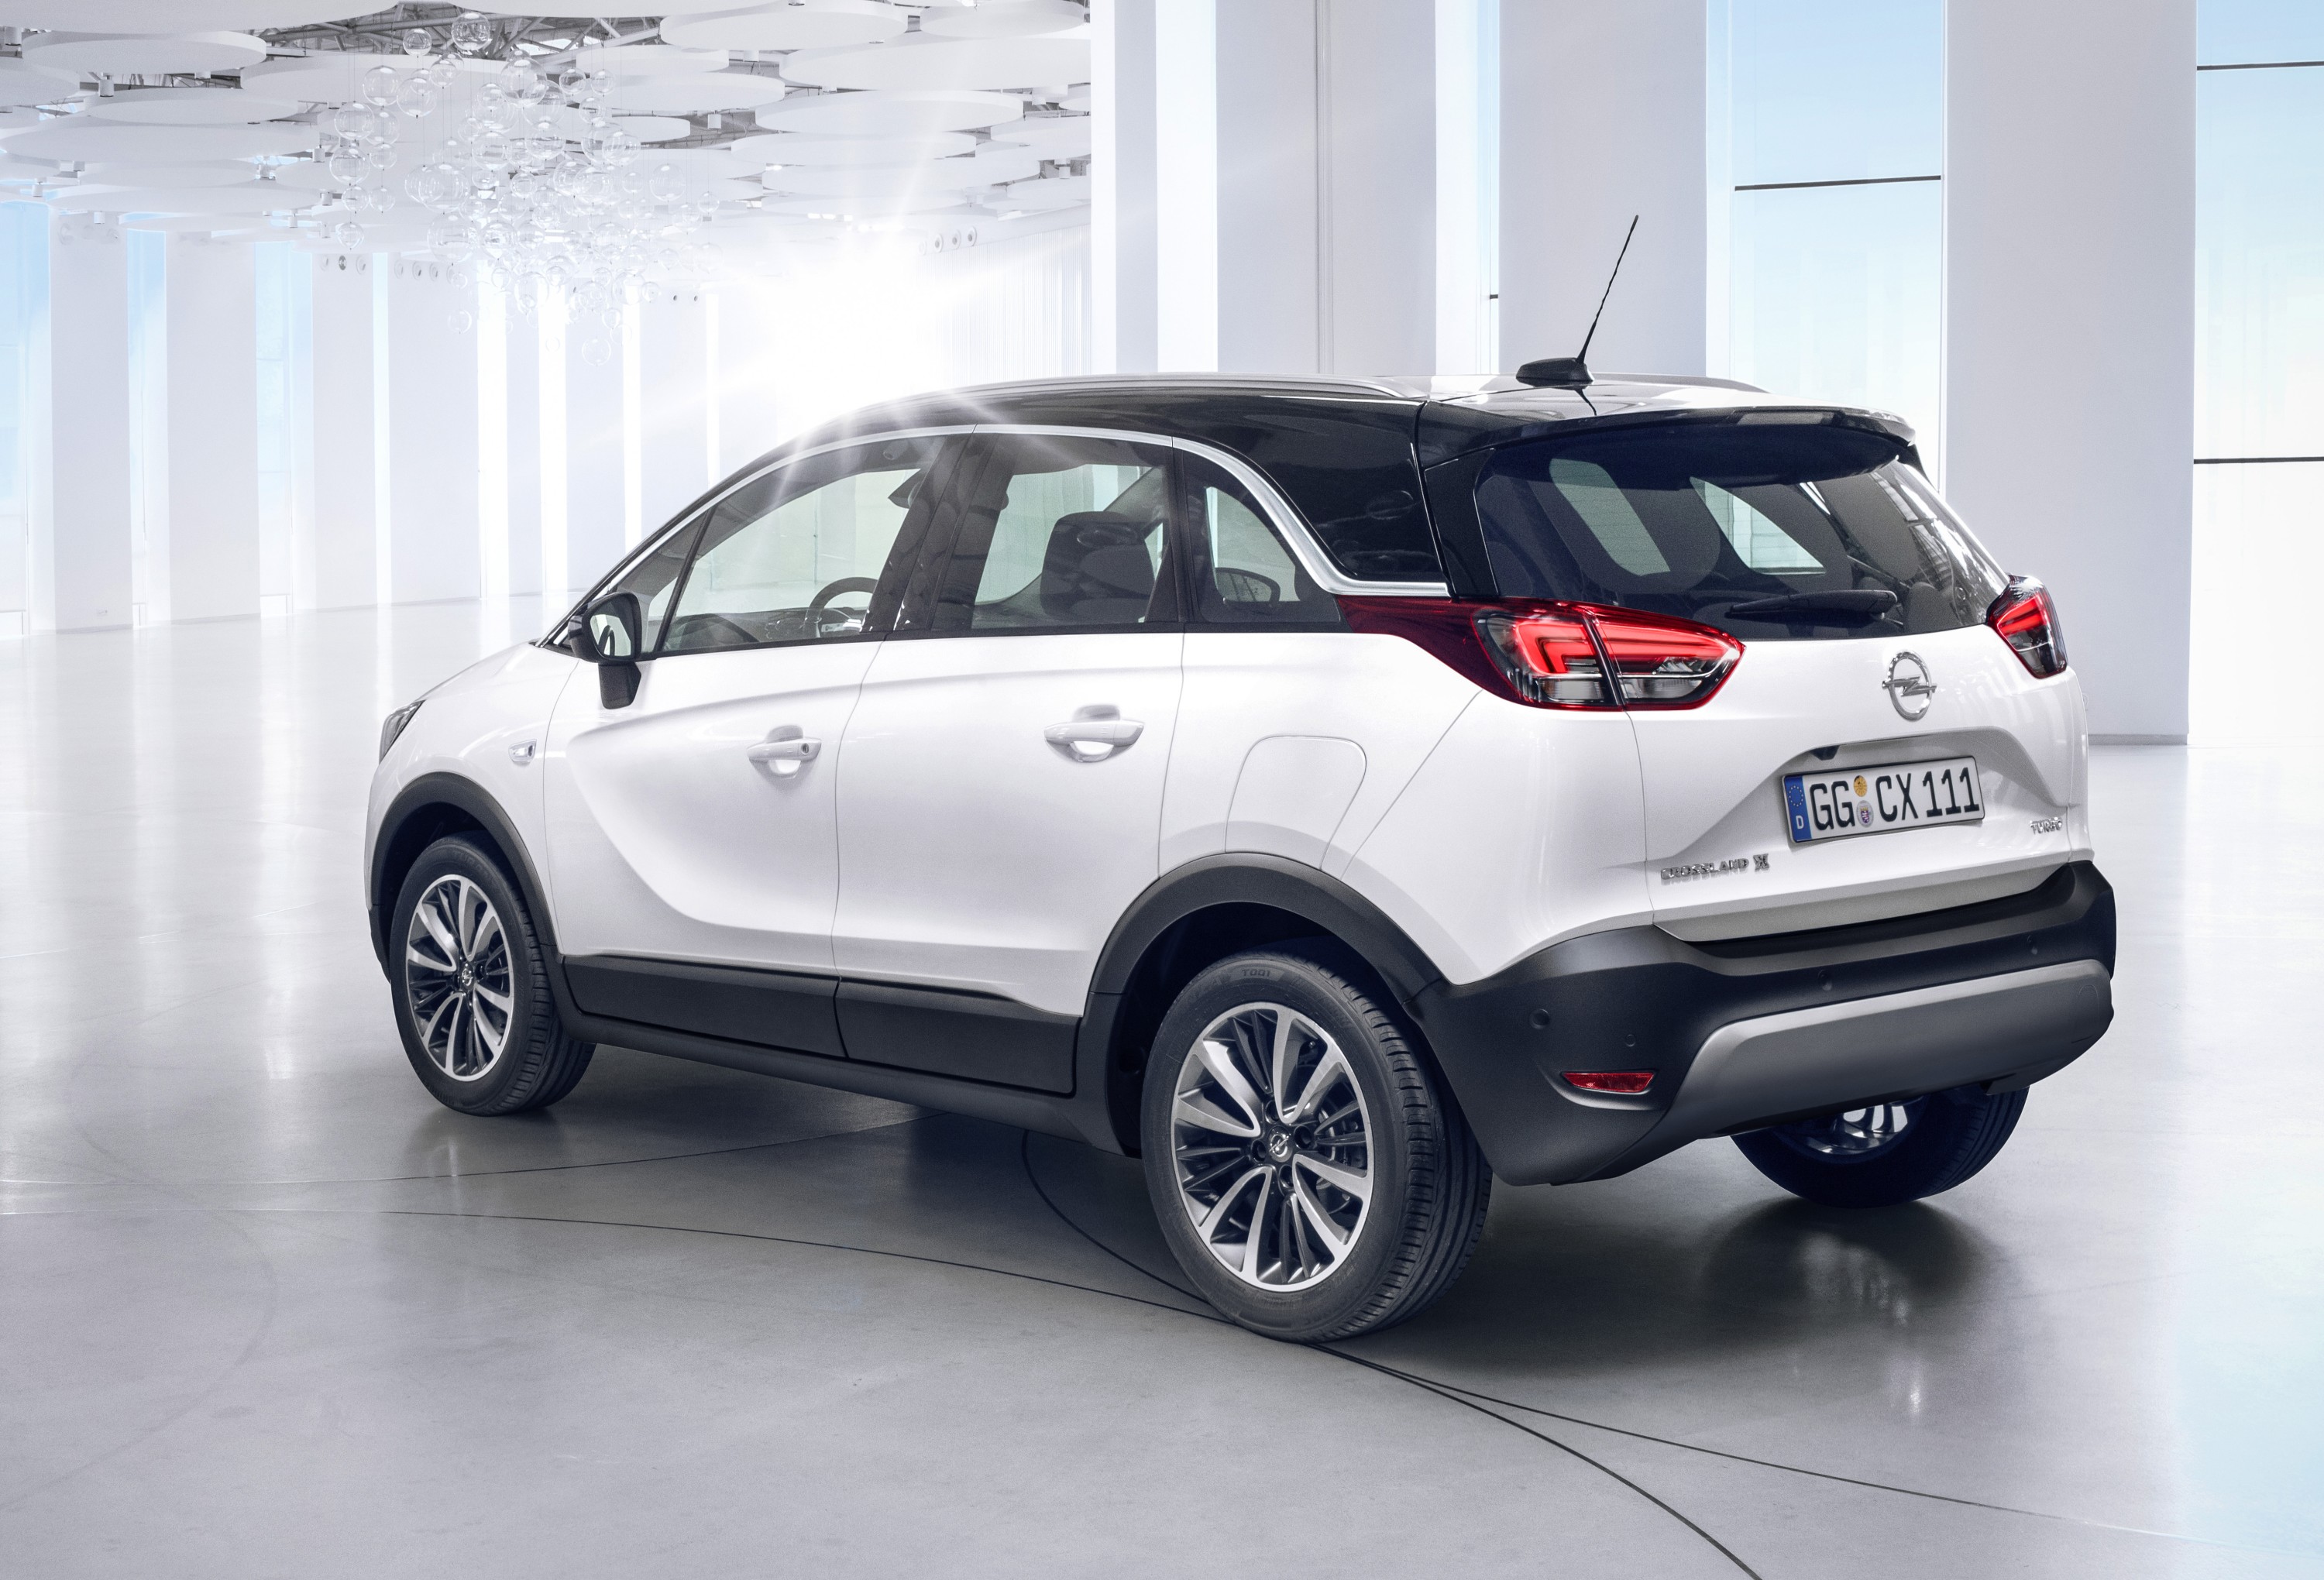 X-tra compact: With a length of 4.21 meters, the new Opel Crossland X is 16 centimeters shorter than an Astra while at the same time 10 centimeters higher.